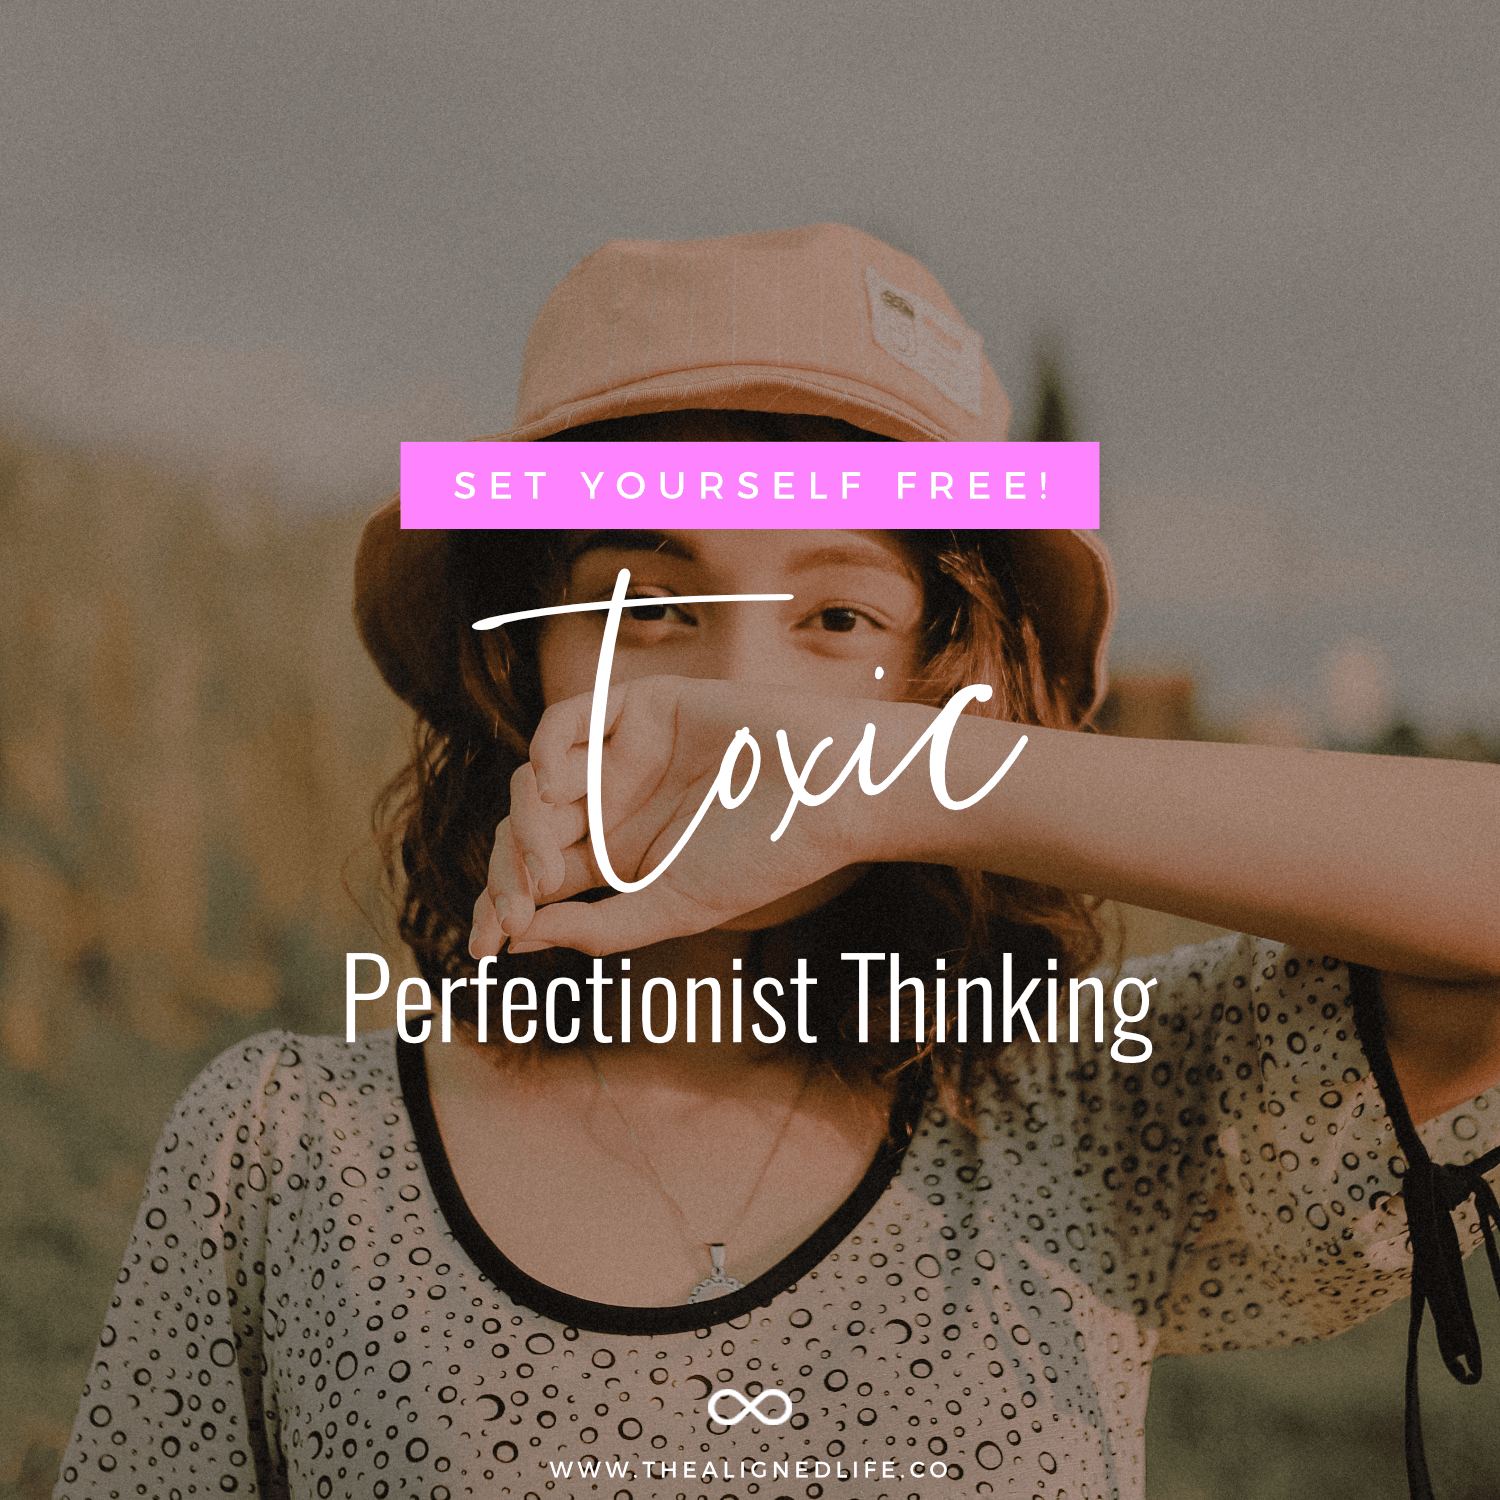 Toxic Perfectionist Thinking: How To Set Yourself Free